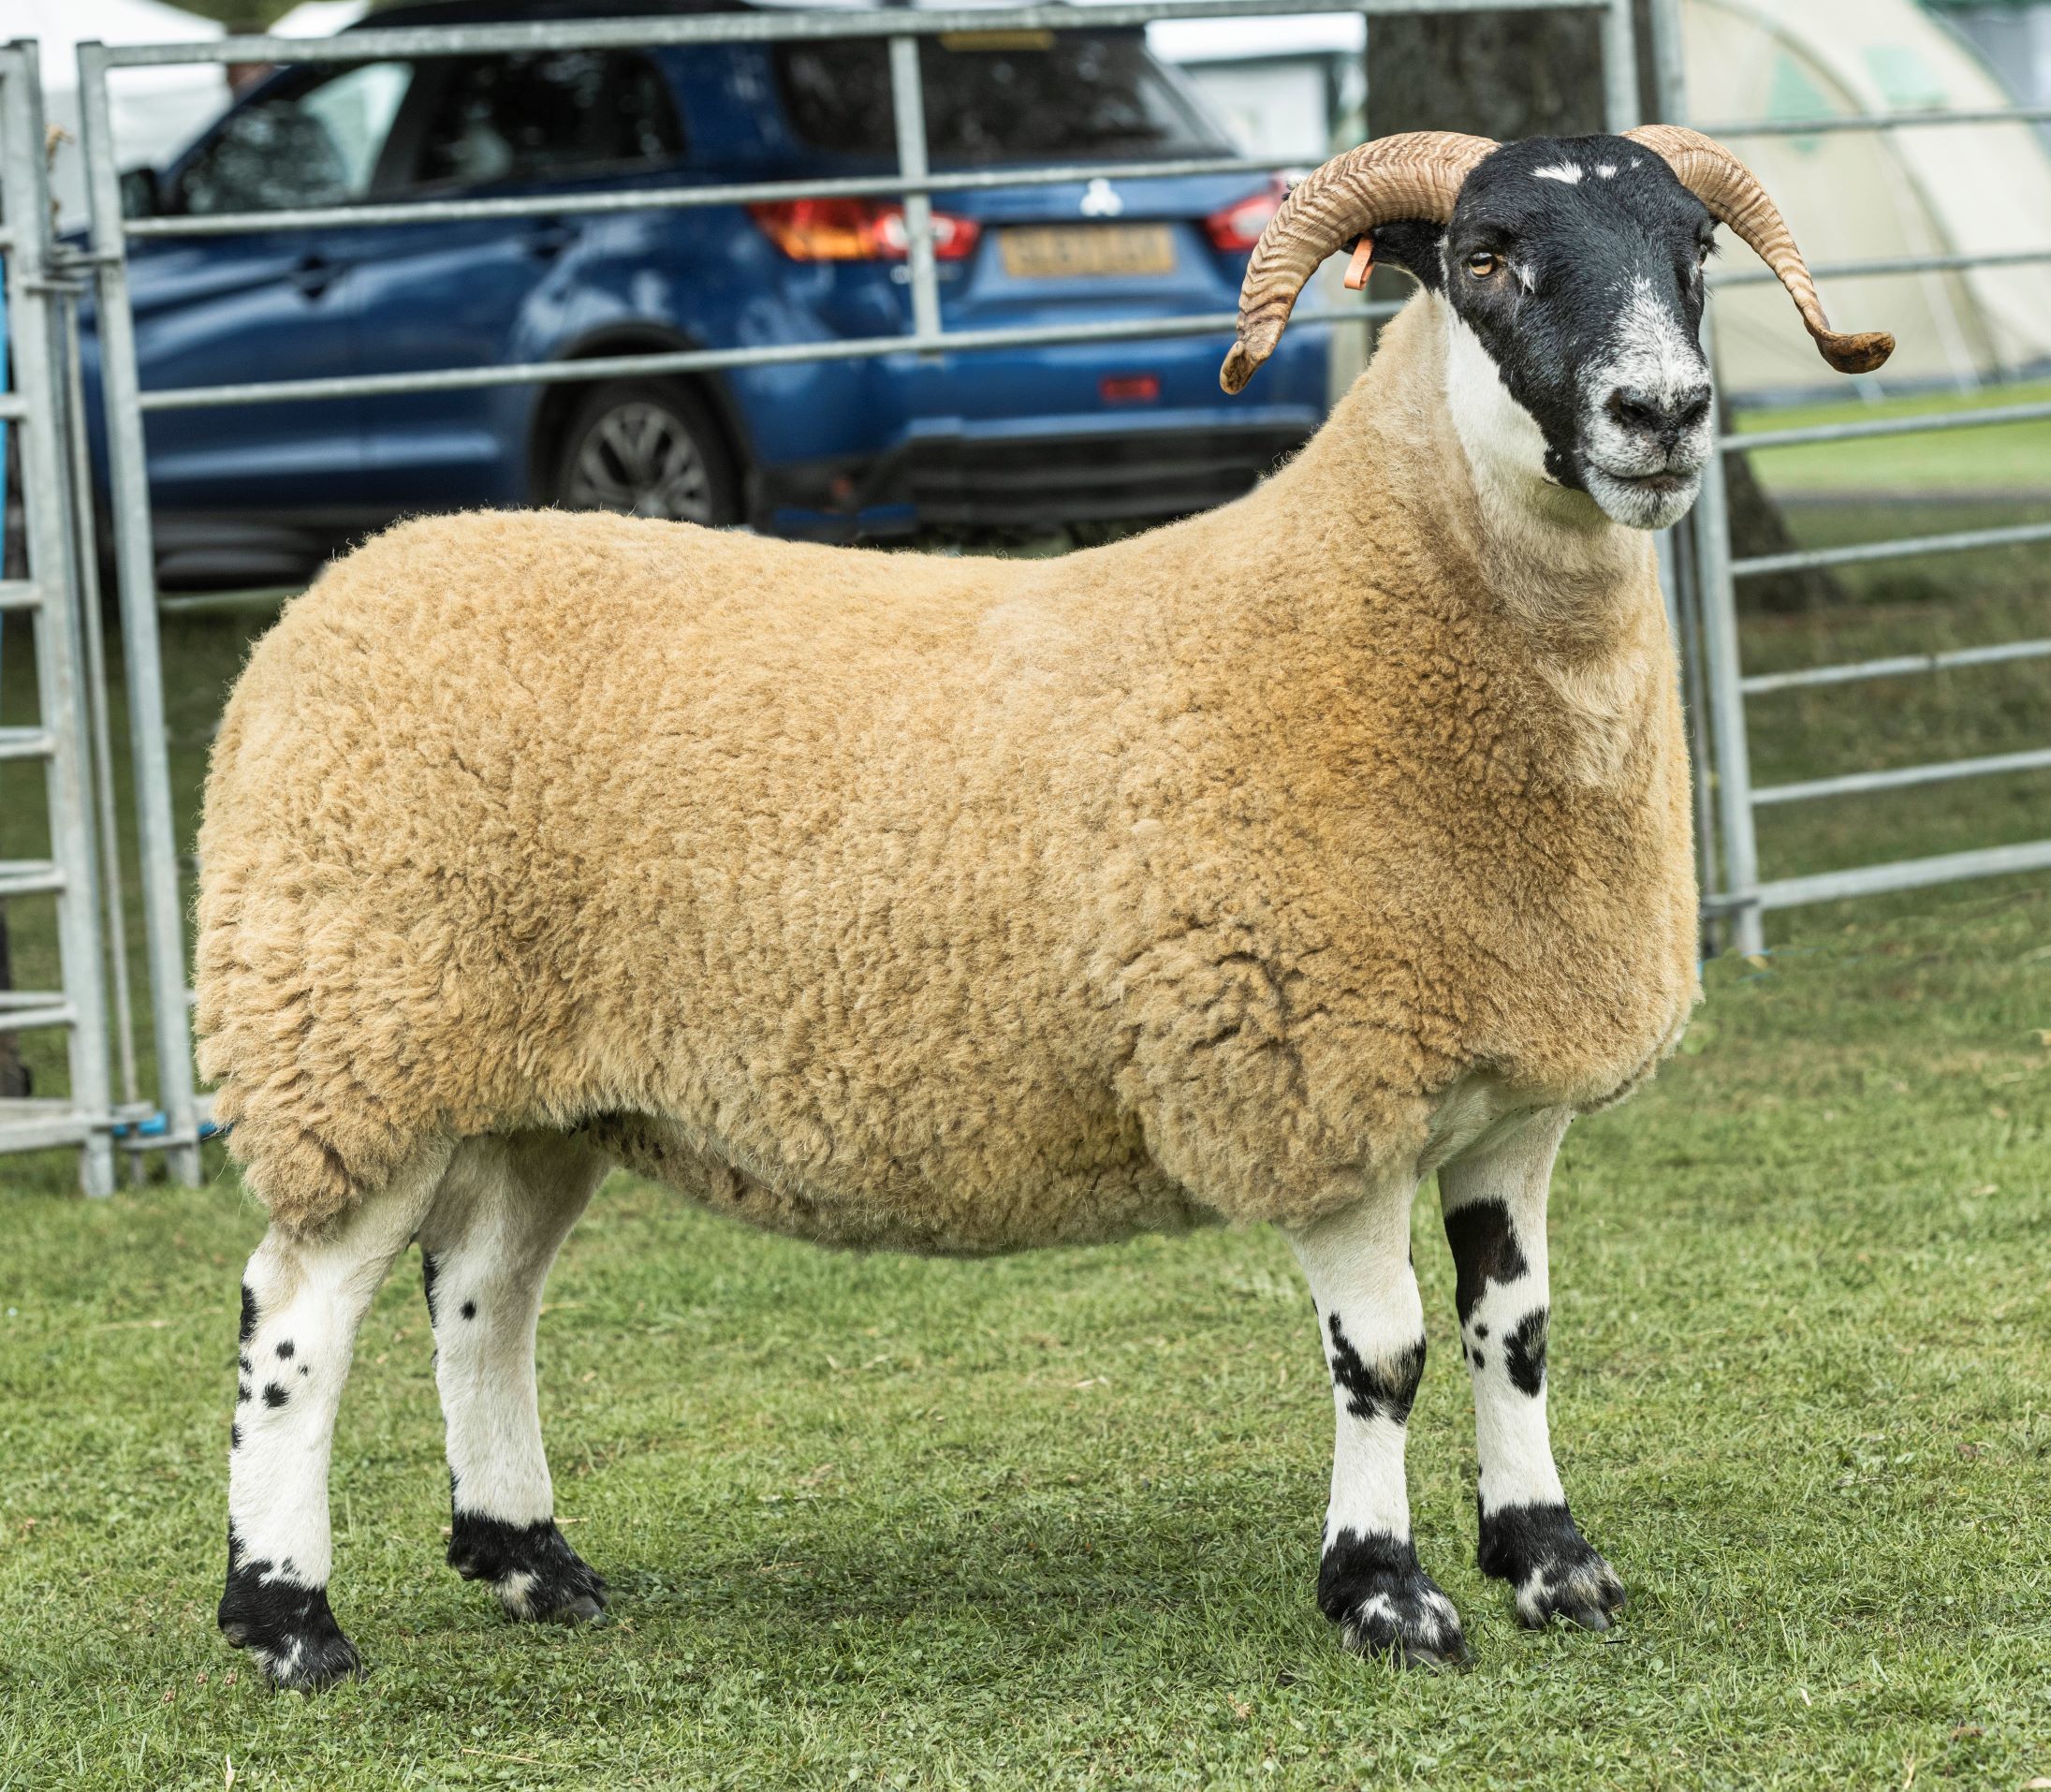 Supreme sheep was the North-type Blackface champion from Tom and Mairi Paterson and son Robert, Craigneich